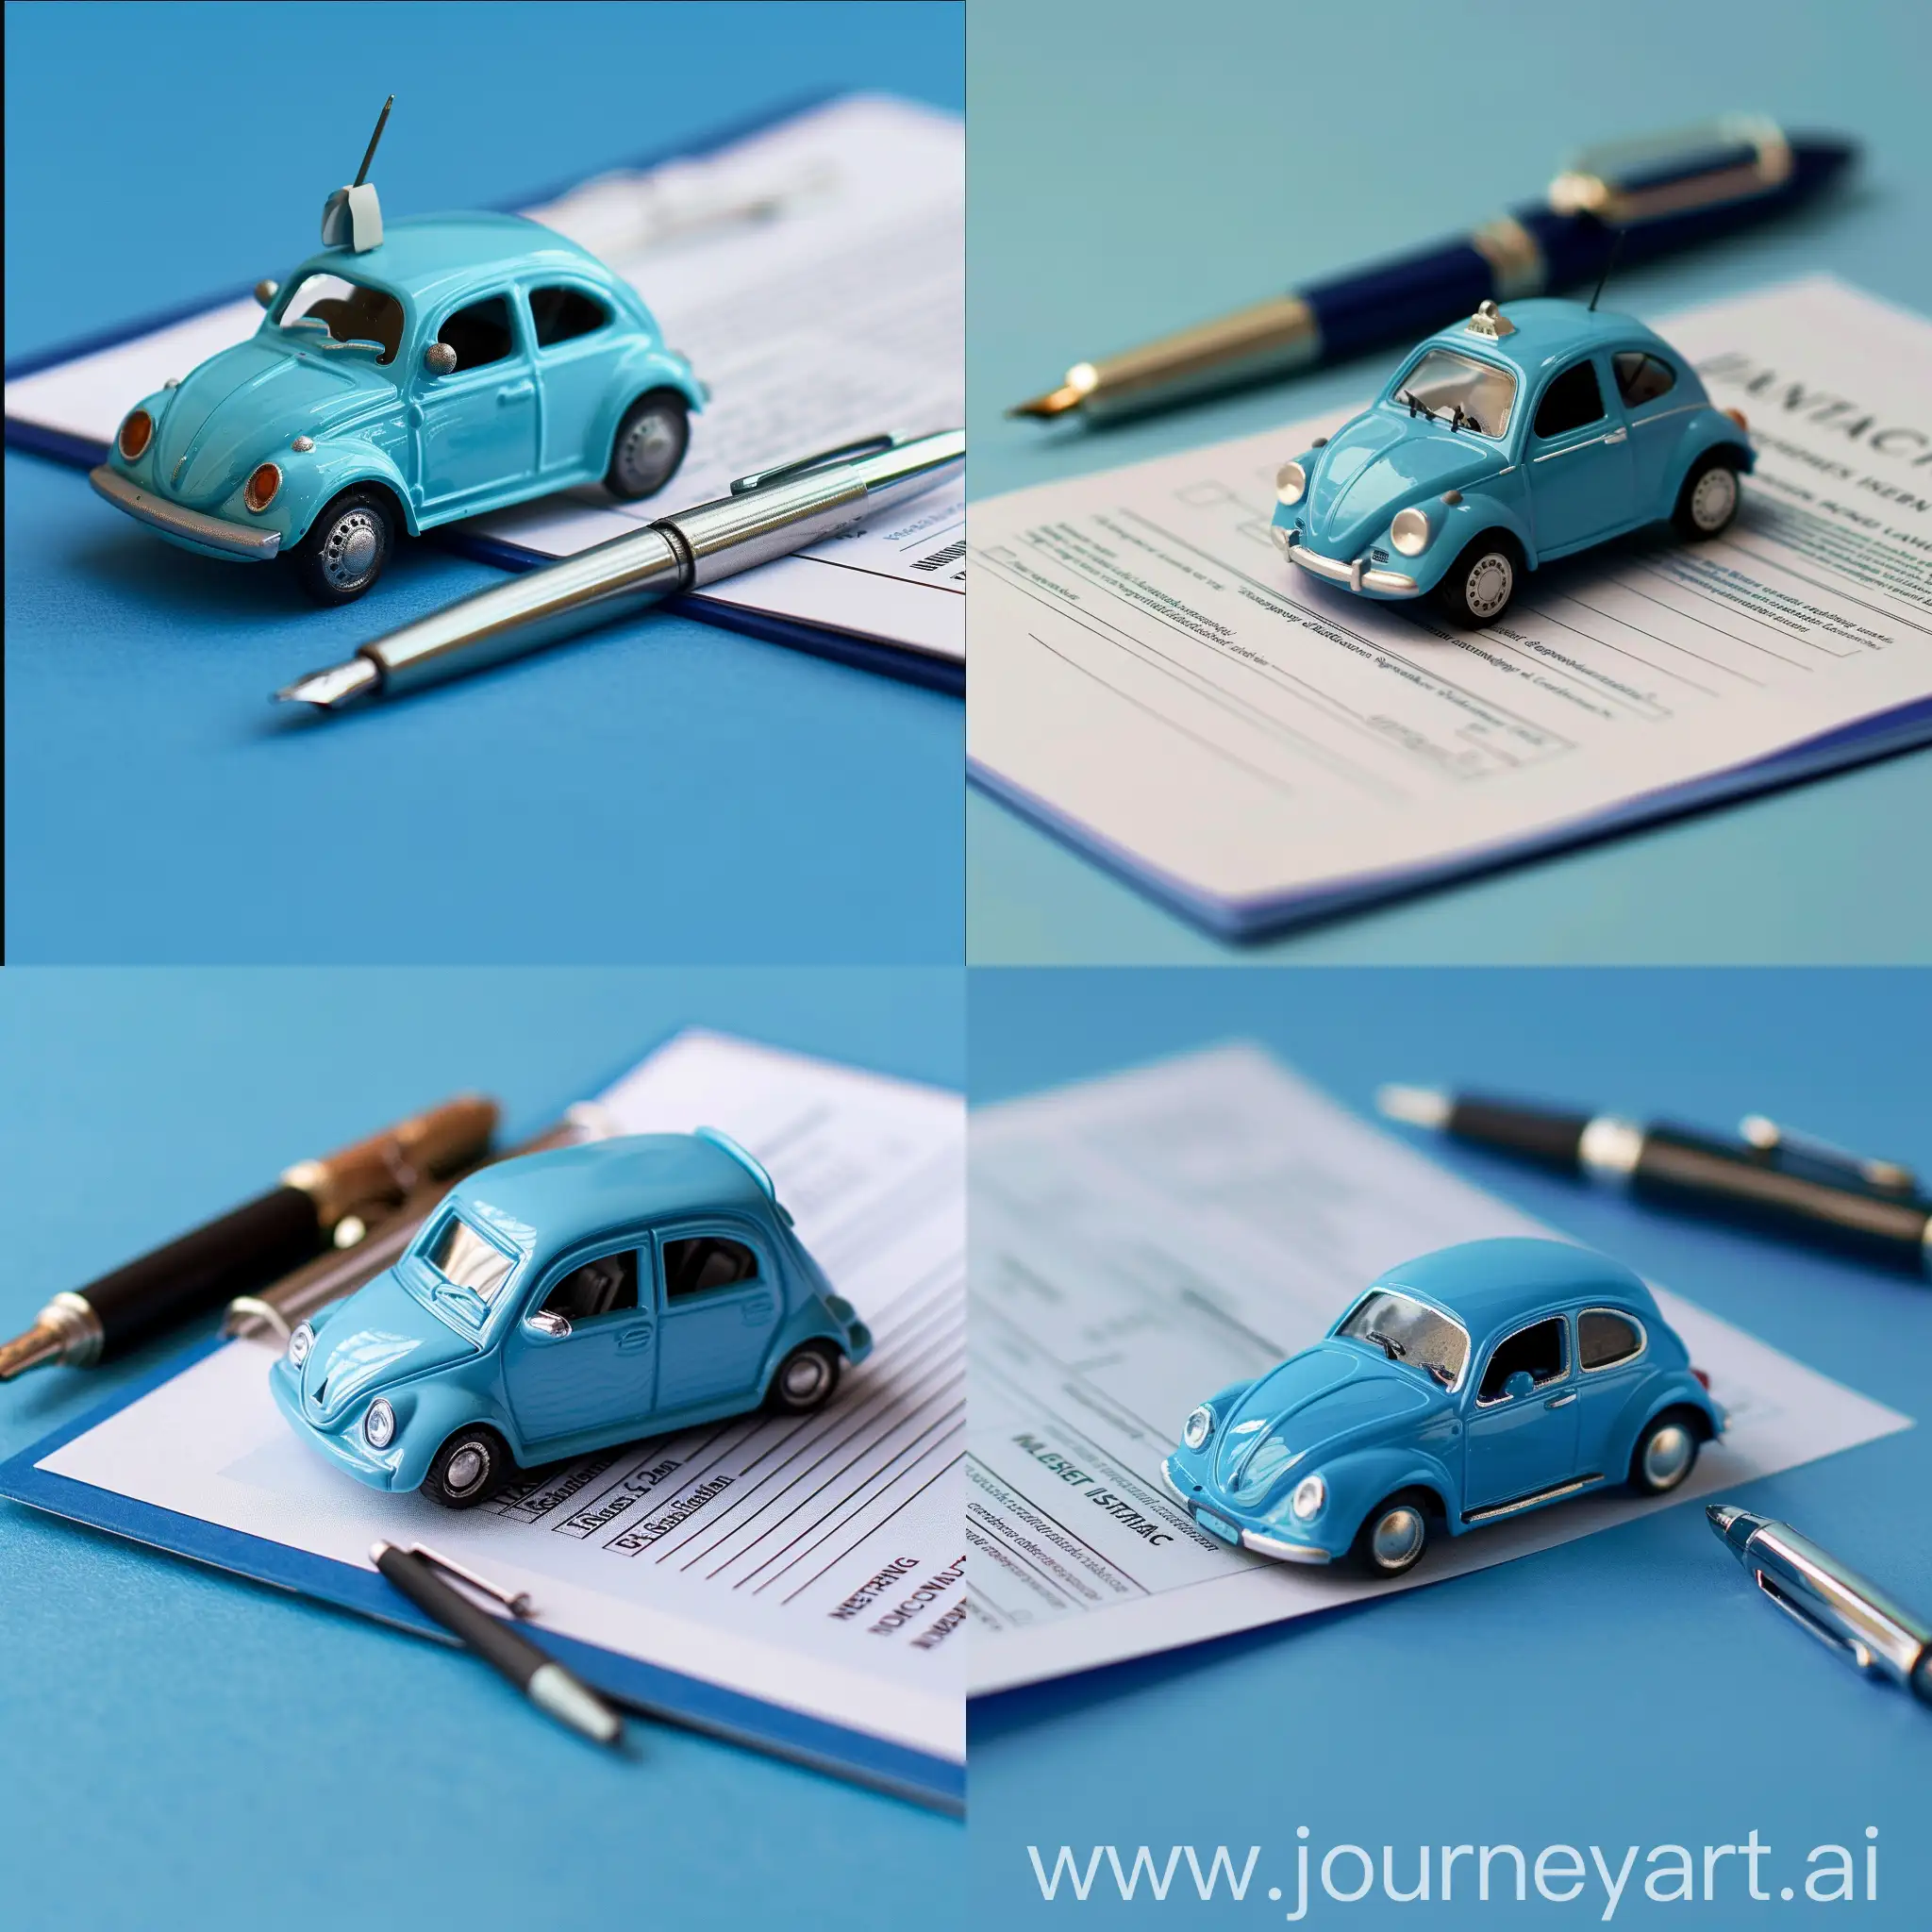 Blue-Toy-Car-with-Insurance-Document-and-Pen-on-a-Vibrant-Background